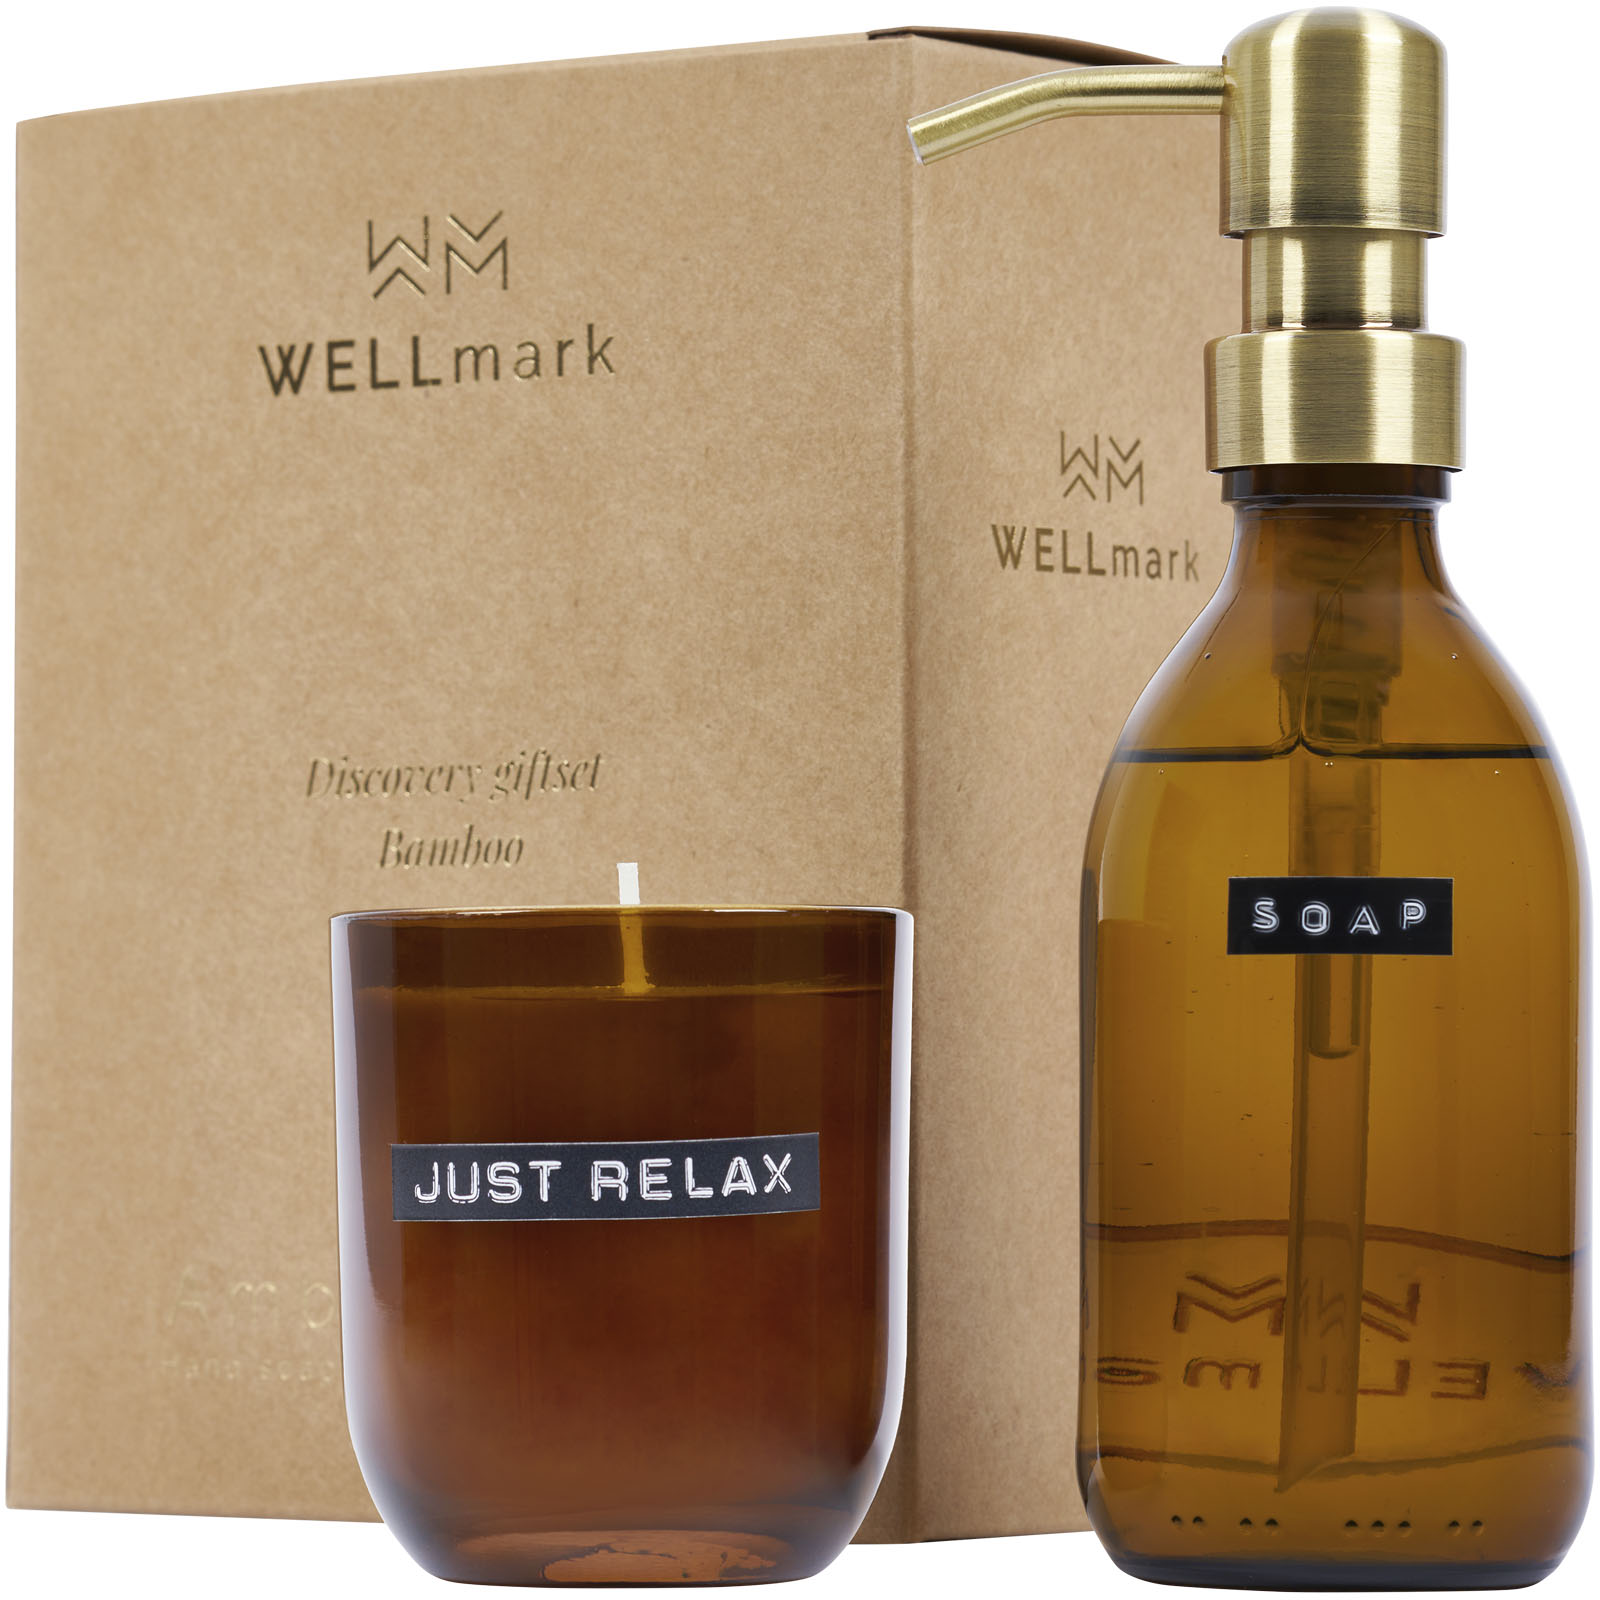 Health & Personal Care - Wellmark Discovery 200 ml hand soap dispenser and 150 g scented candle set - bamboo fragrance